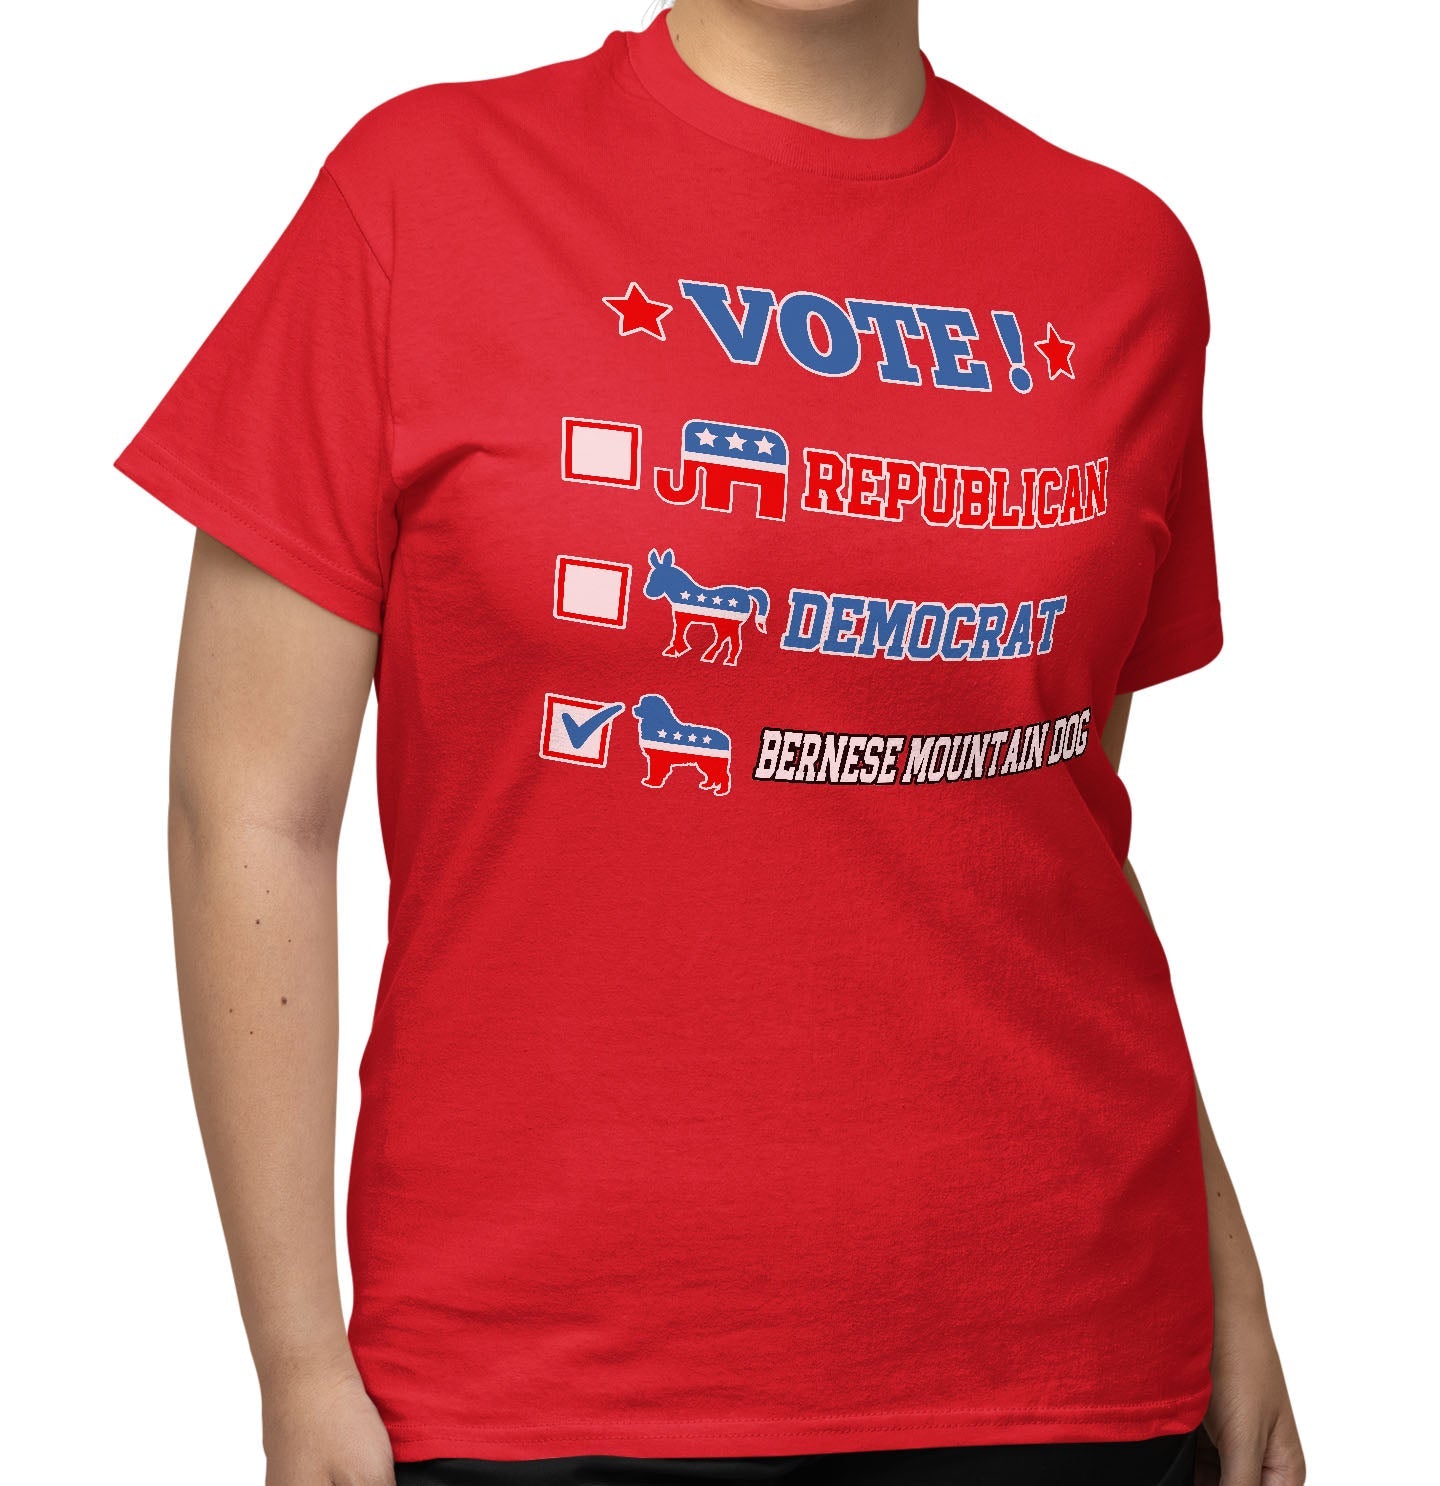 Vote for the Bernese Mountain Dog - Adult Unisex T-Shirt